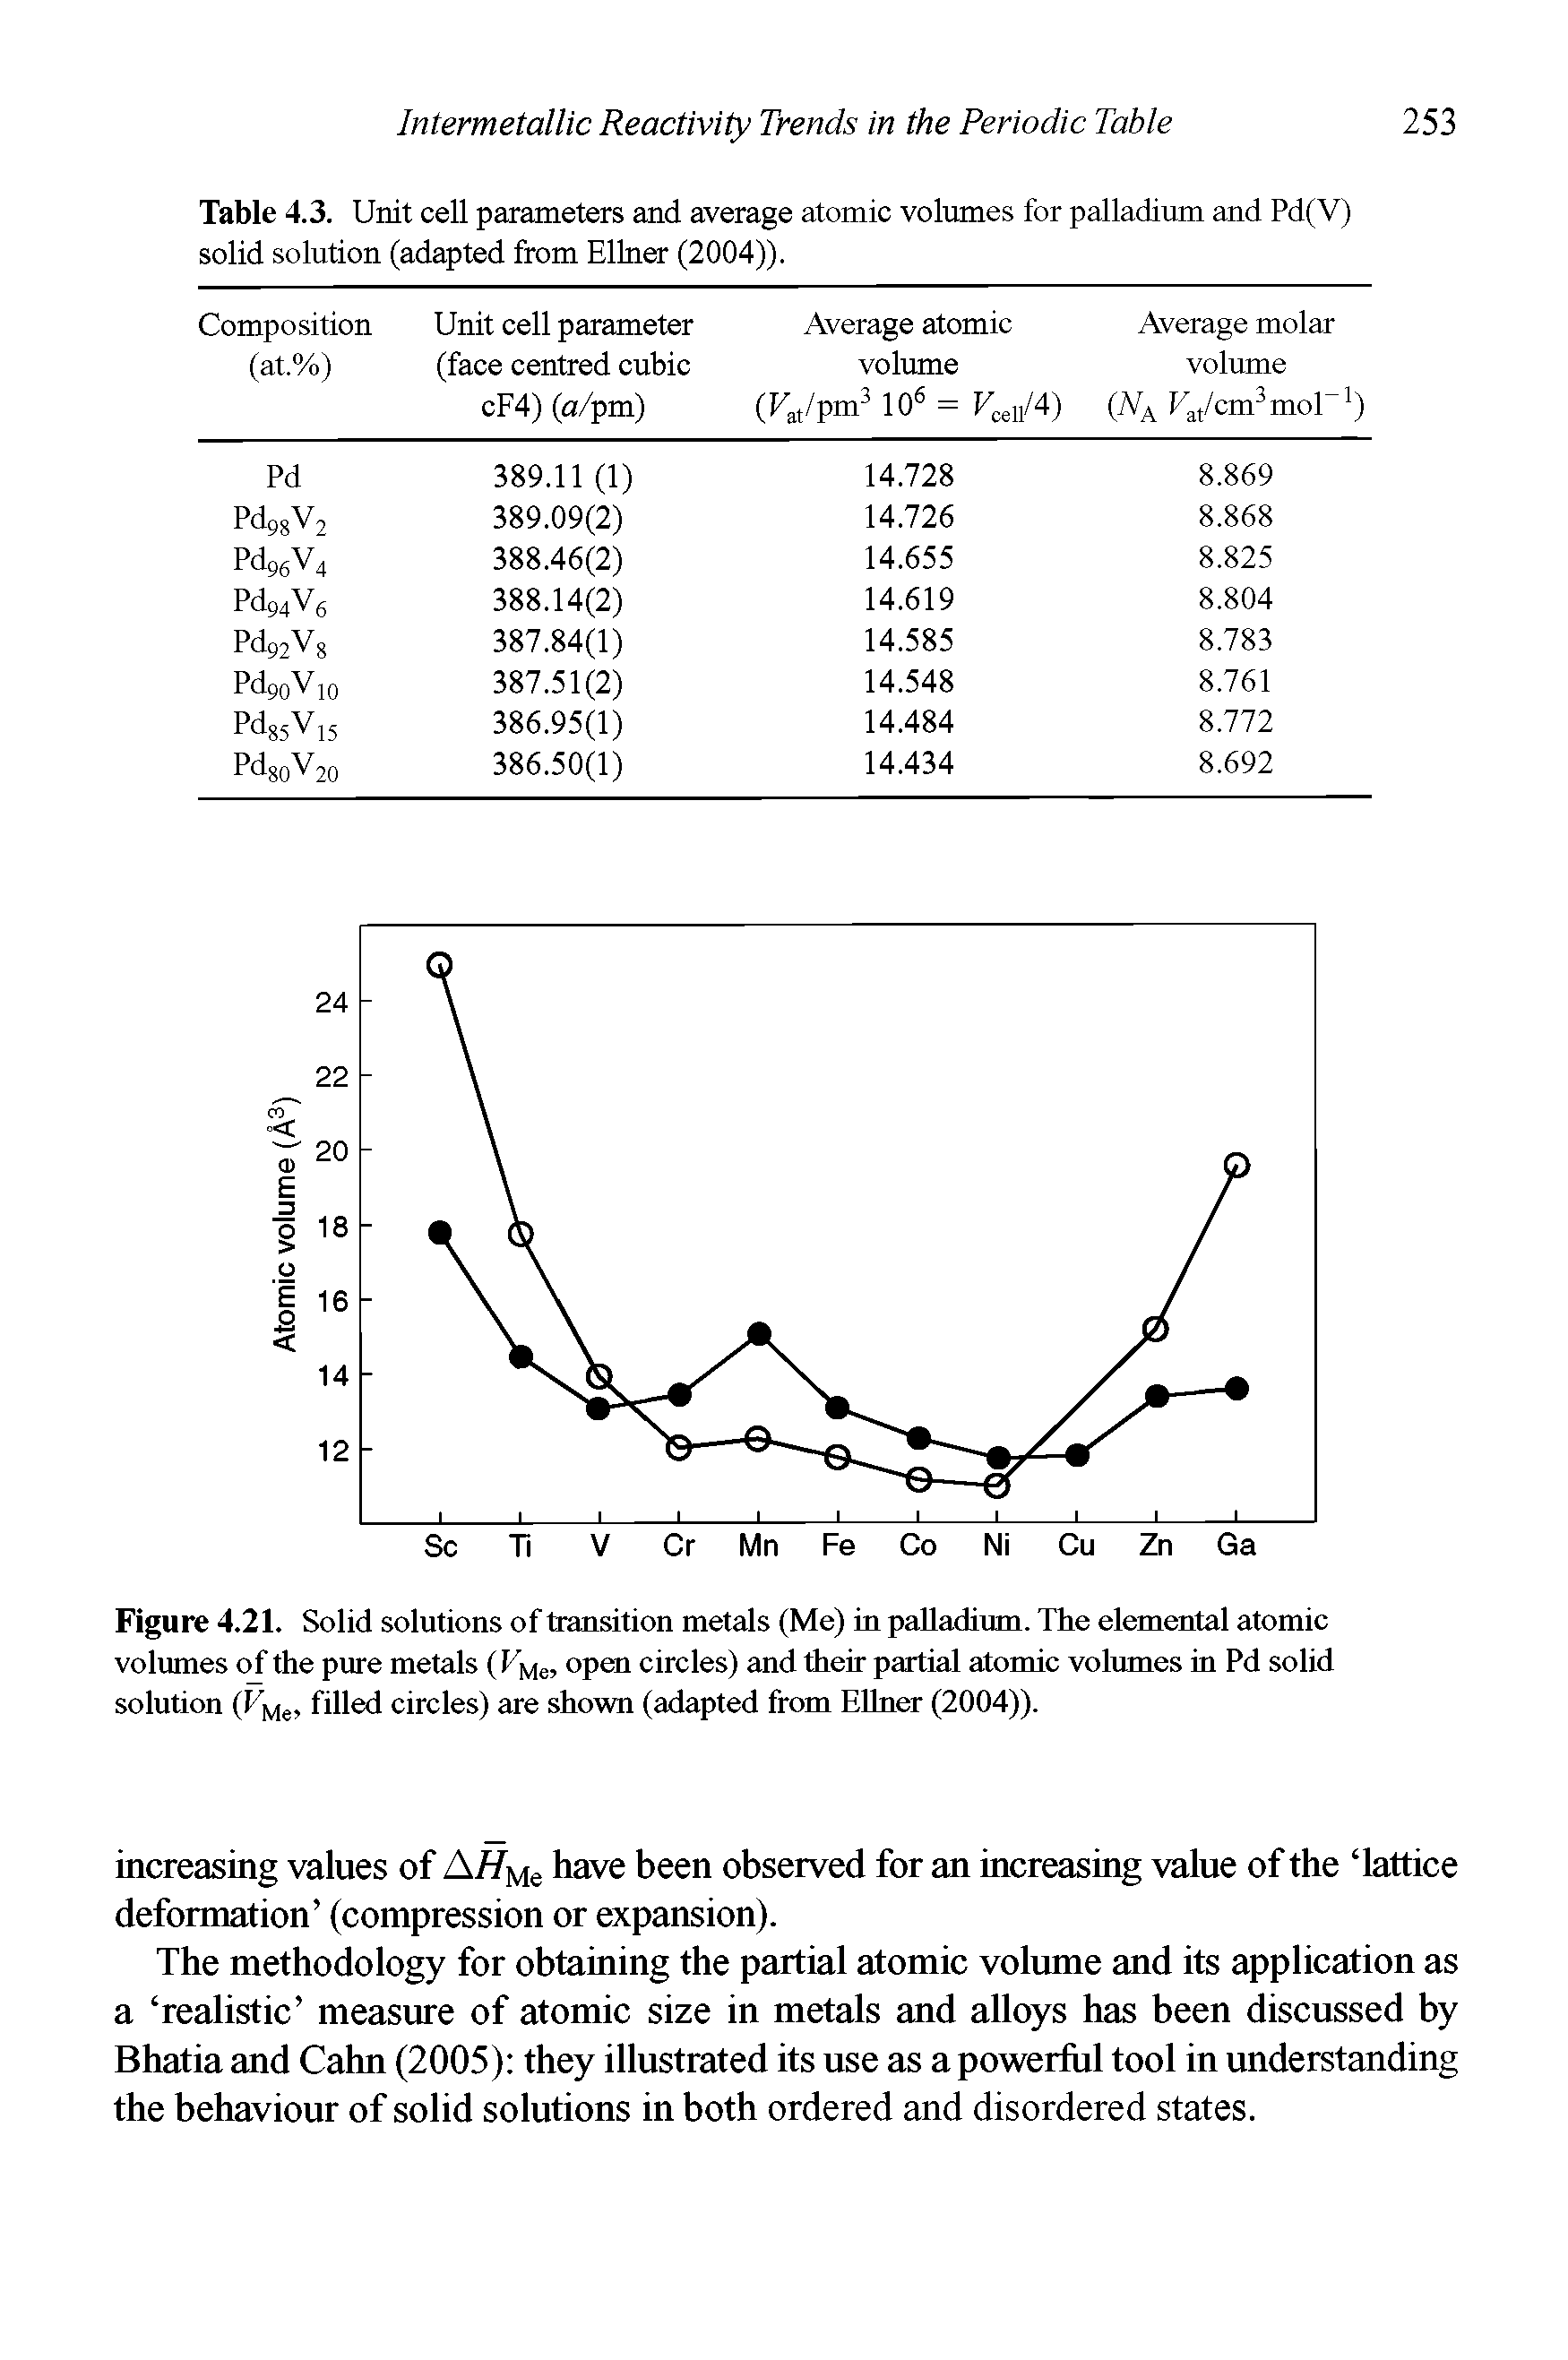 Table 4.3. Unit cell parameters and average atomic volumes for palladium and Pd(V) solid solution (adapted from Ellner (2004)).